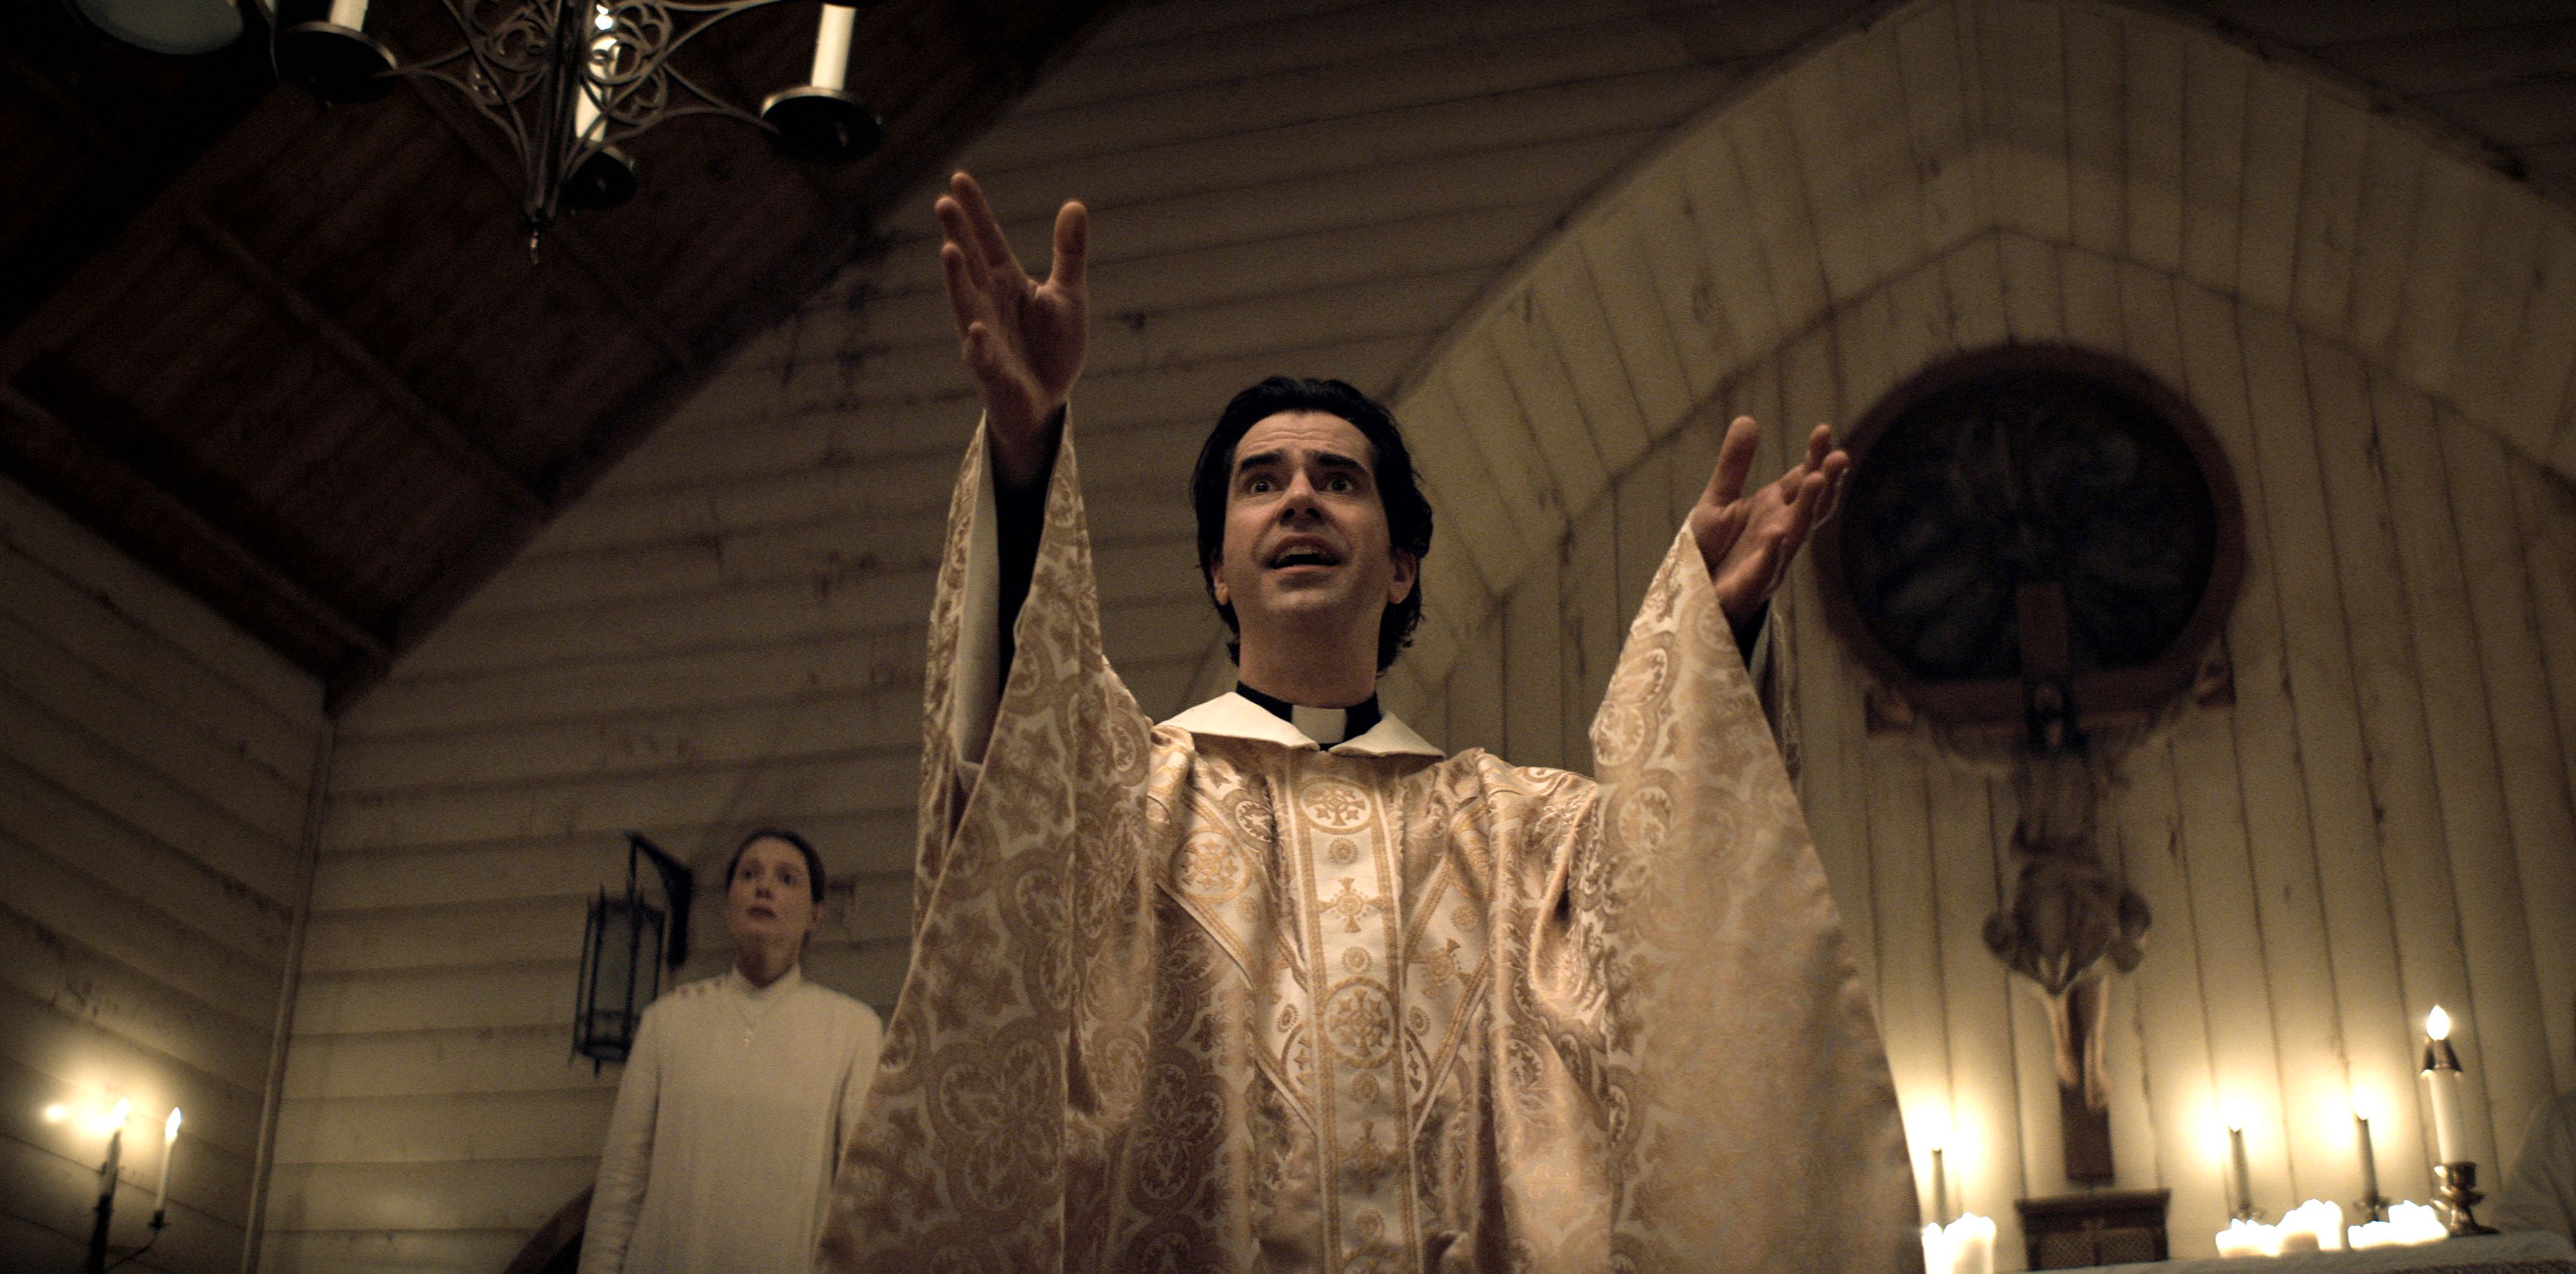 Midnight Mass Cast on Netflix - Hamish Linklater as Father Paul